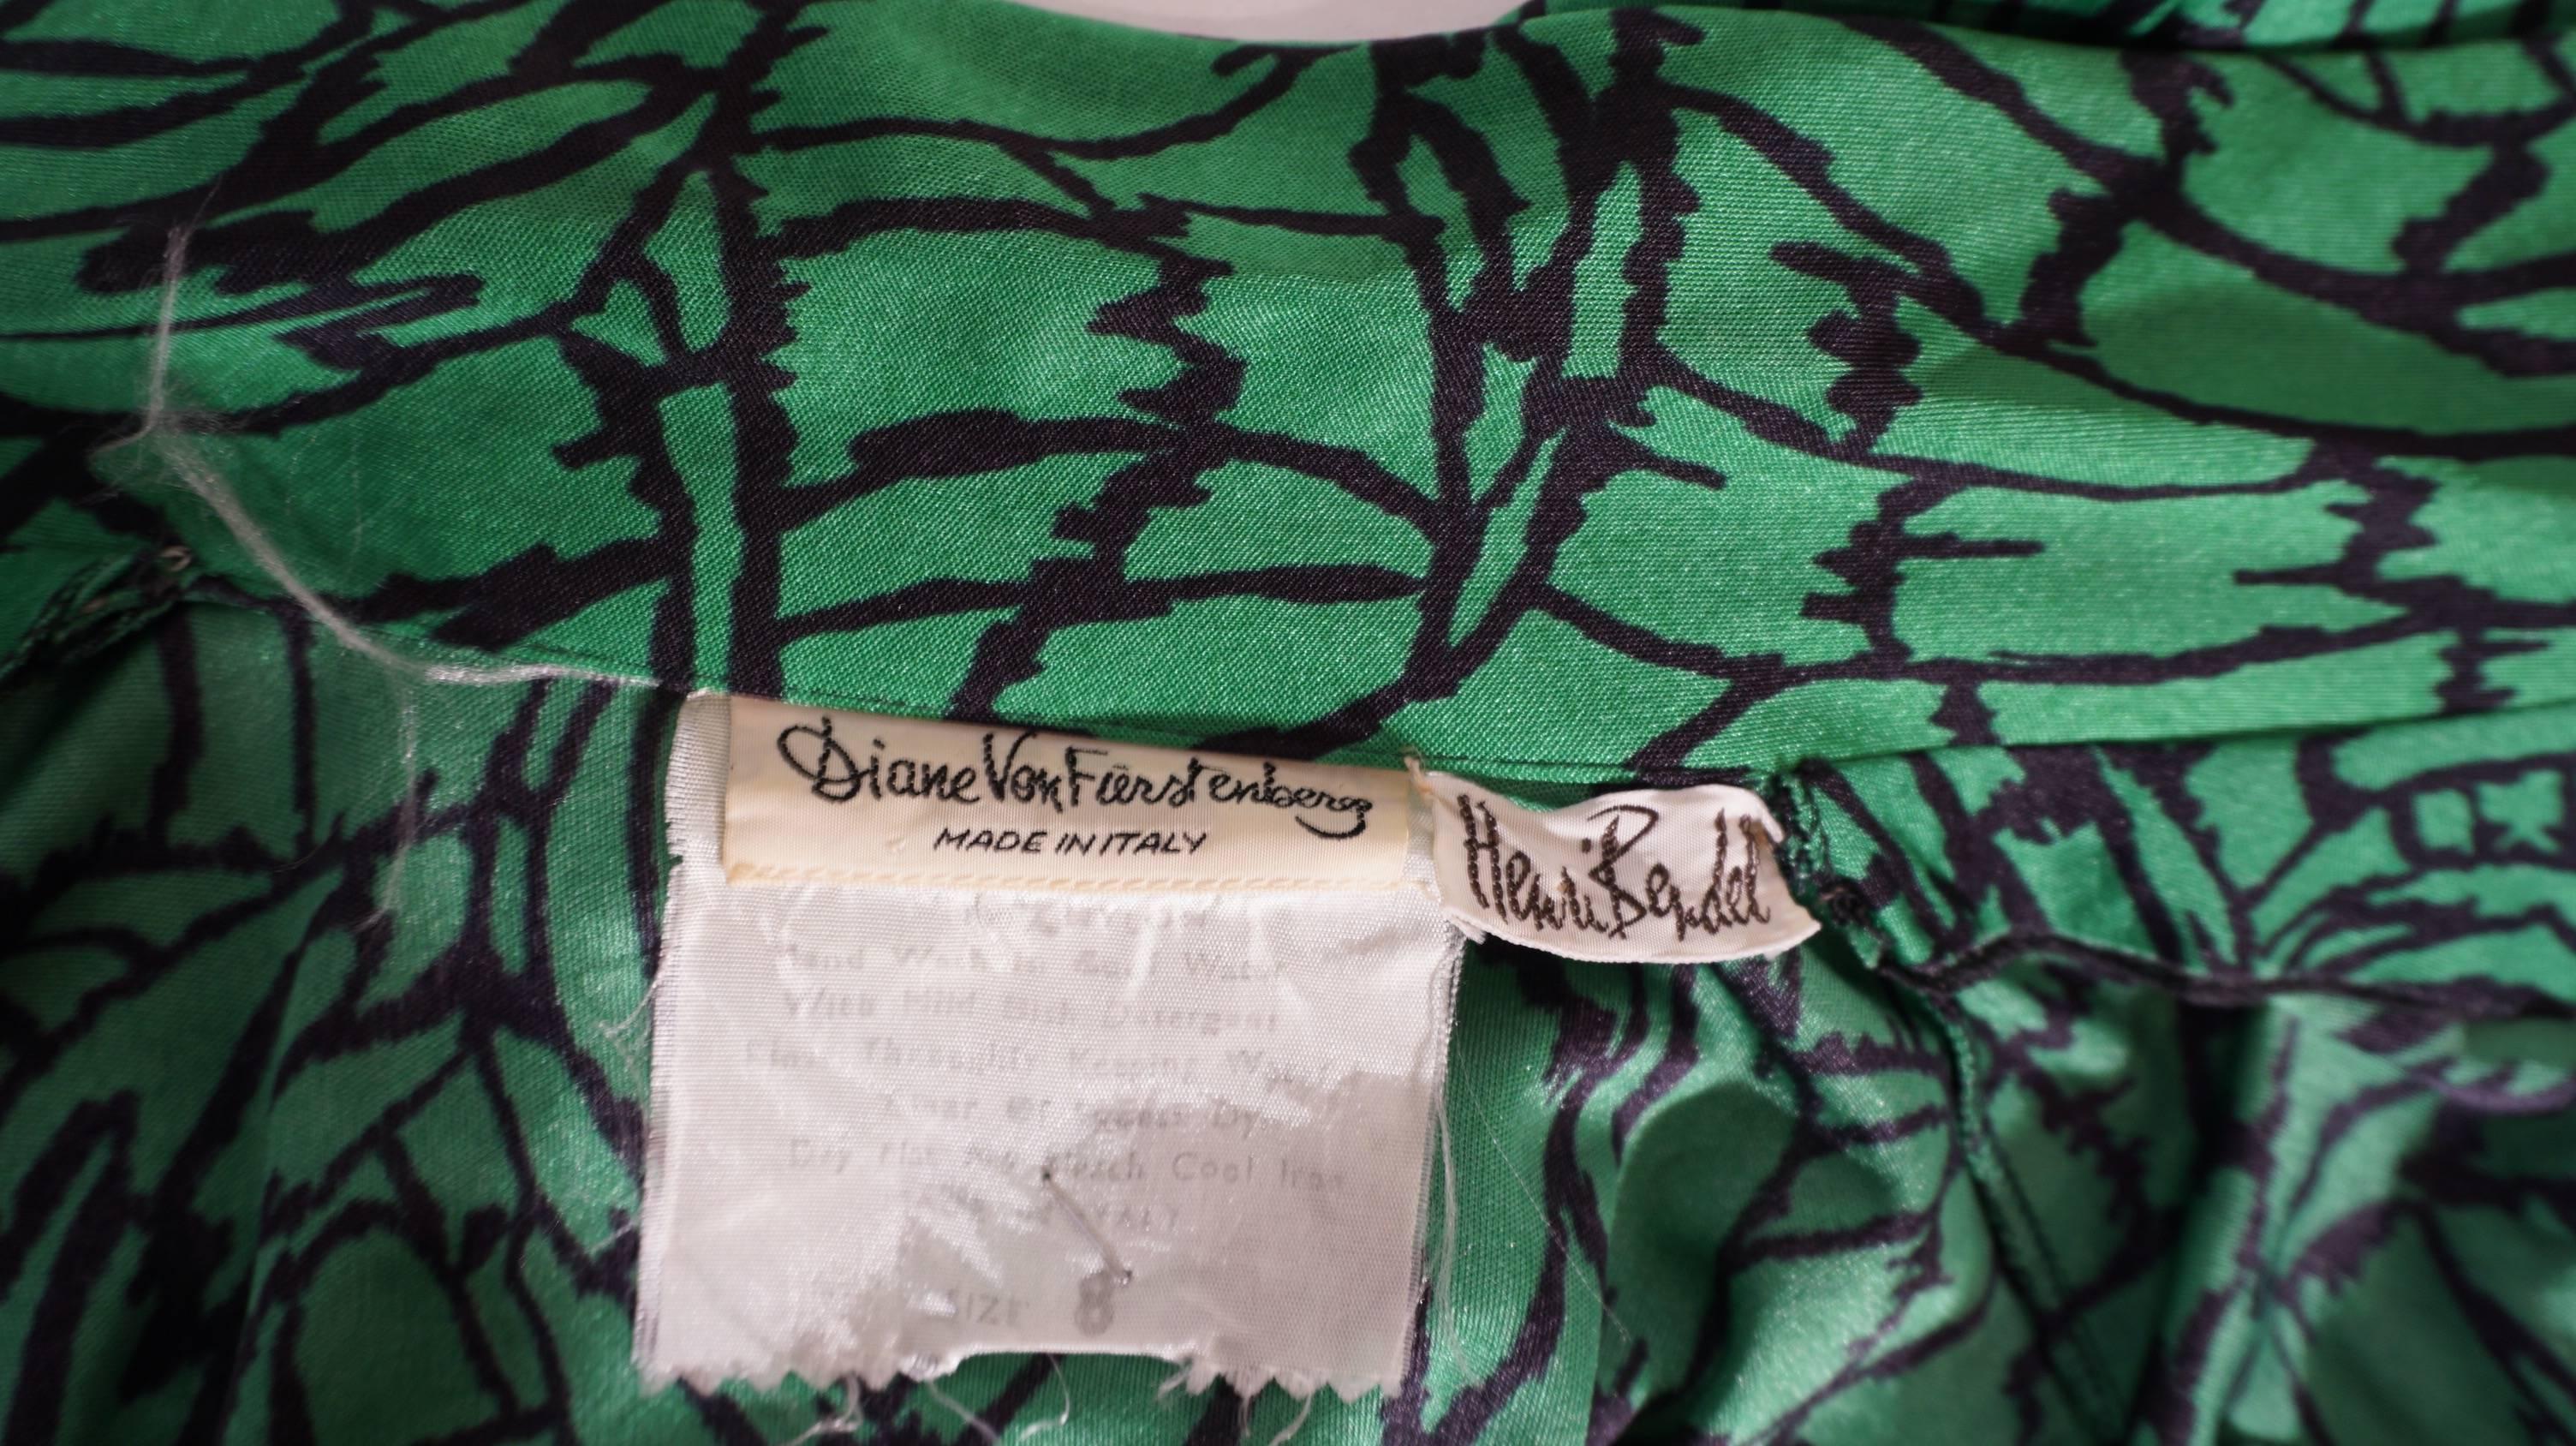 Diane Von Furstenberg Green Print Maxi Gown With Matching L/S Shirt And Tie For Sale 2